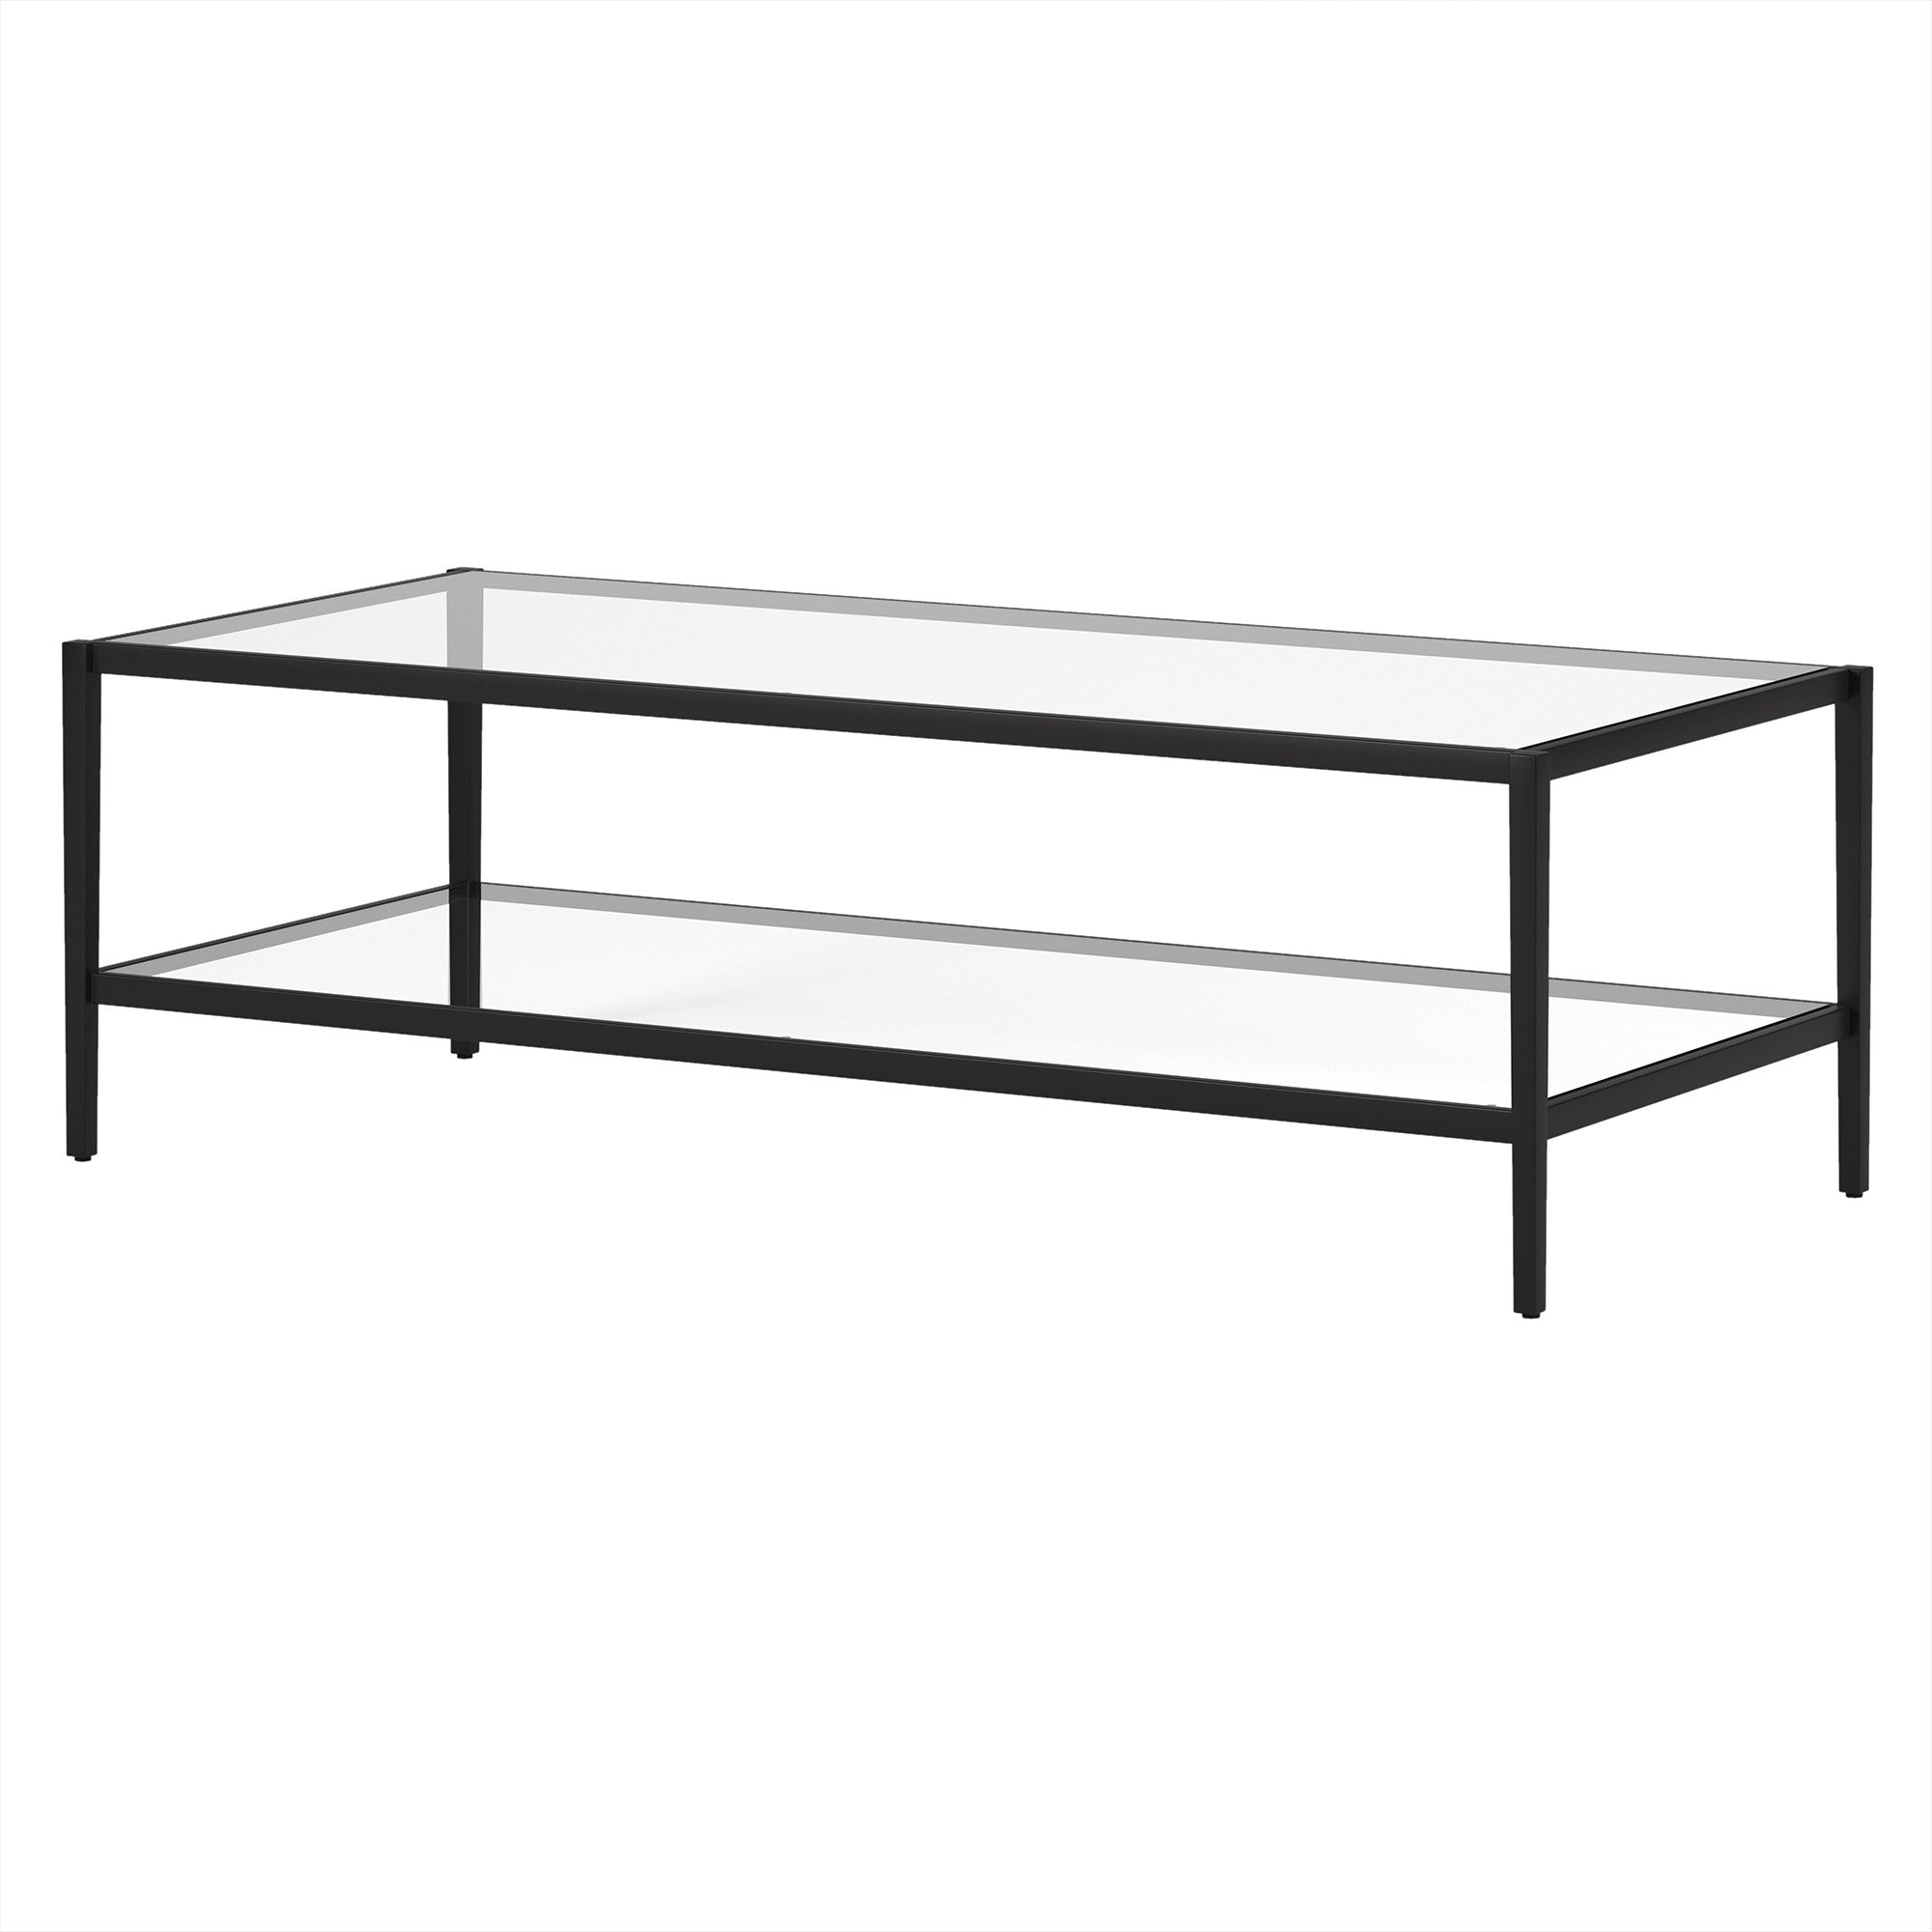 54" Black Glass And Steel Coffee Table With Shelf